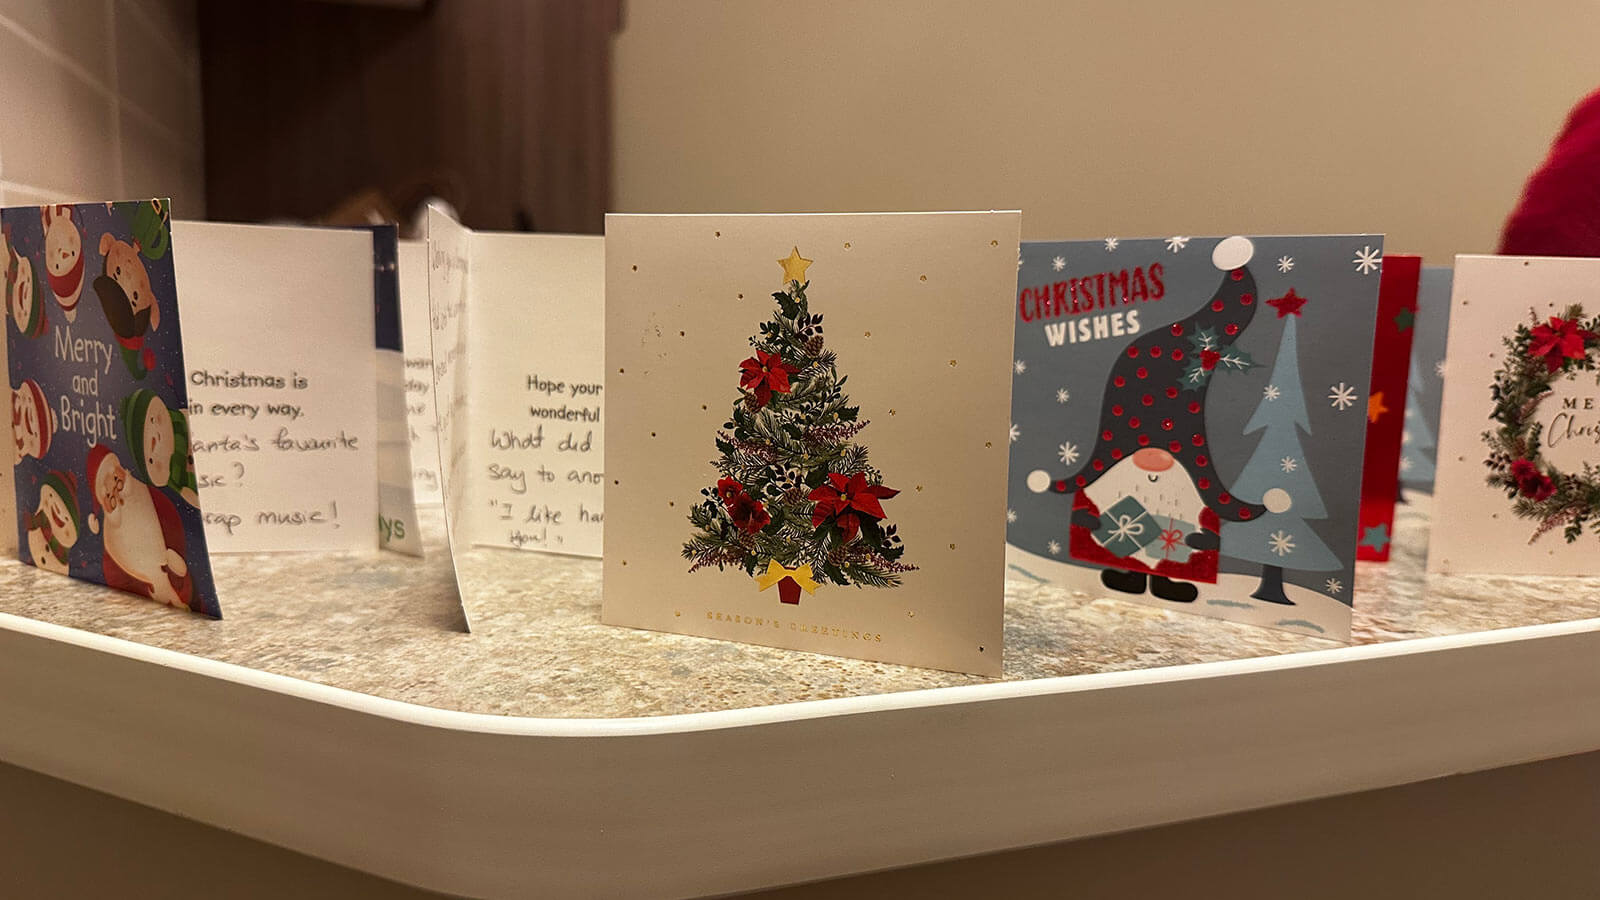 Christmas cards received by Evanston Summit residents